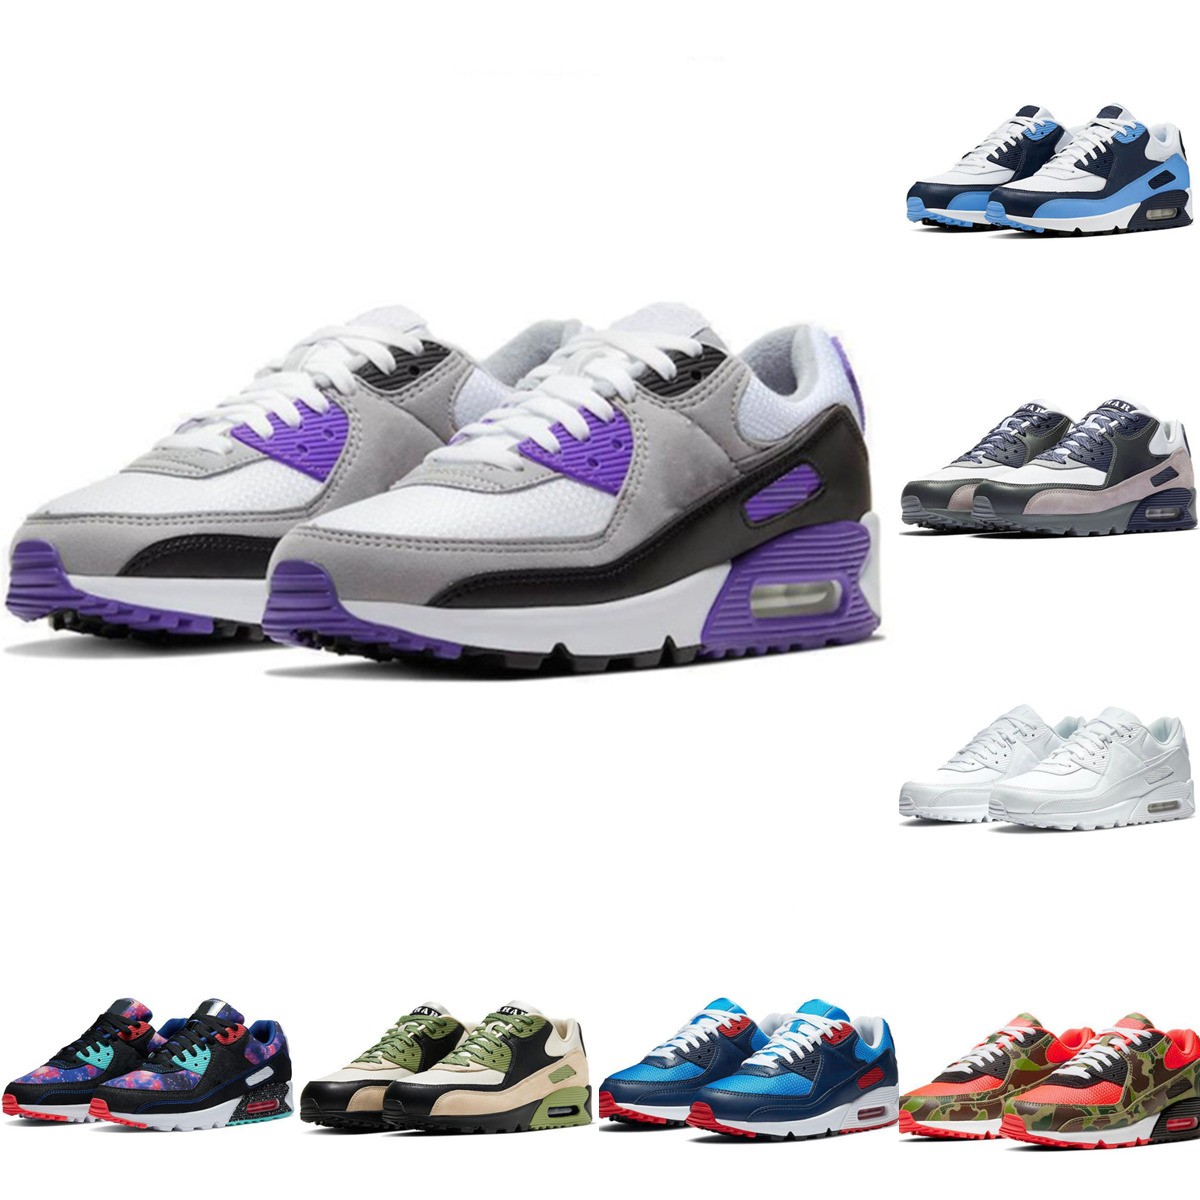 

wholesale 90 running shoes 90s men women chaussures Camo UNC USA Volt Grape Infrared triple white black mens trainers Outdoor Sports Sneakers, Dark green